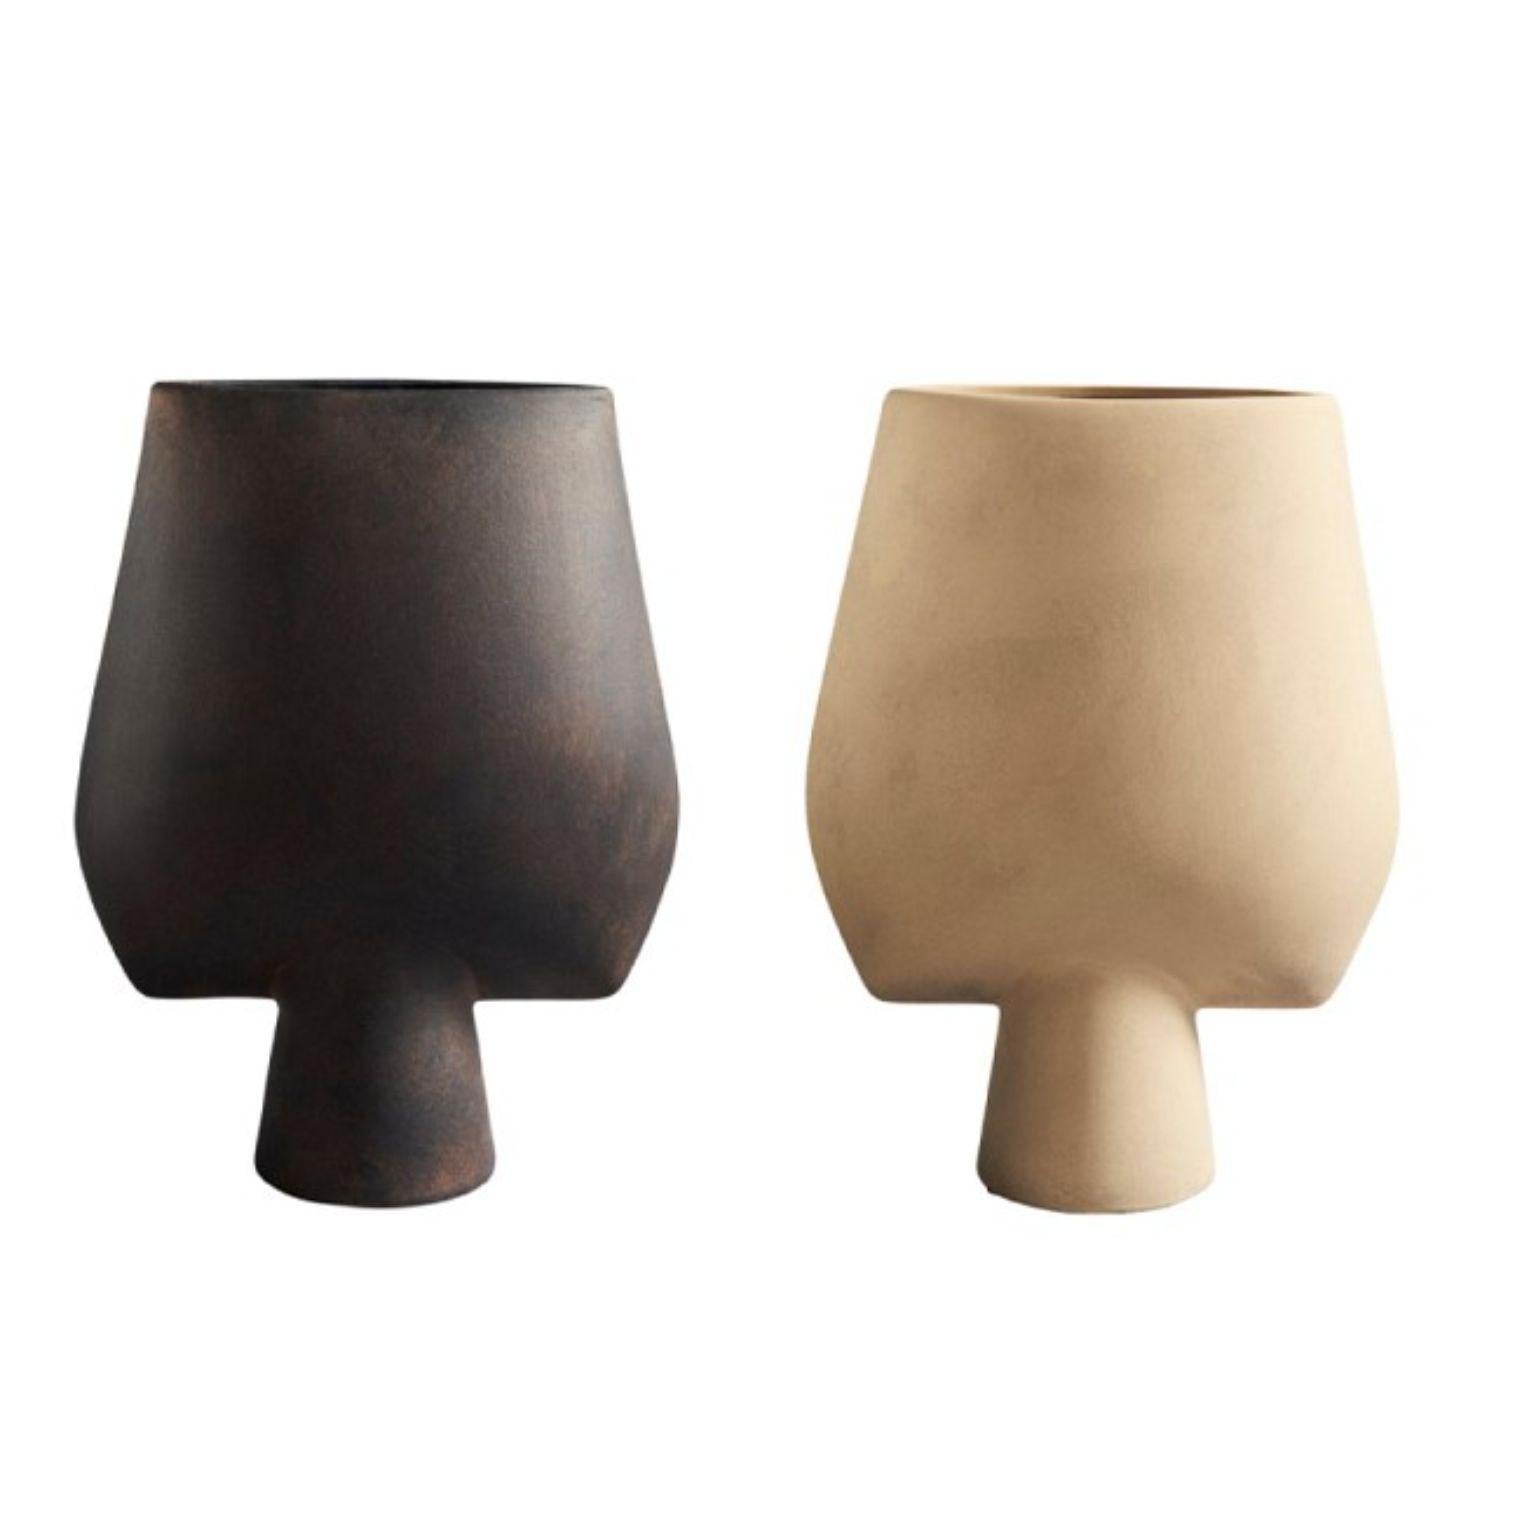 Set of 2 big sphere vases square by 101 Copenhagen
Designed by Kristian Sofus Hansen & Tommy Hyldahl
Dimensions: L33 / W16 / H43 CM
Materials: Ceramic

The Sphere collection celebrates unique silhouettes and textures that makes an impact with